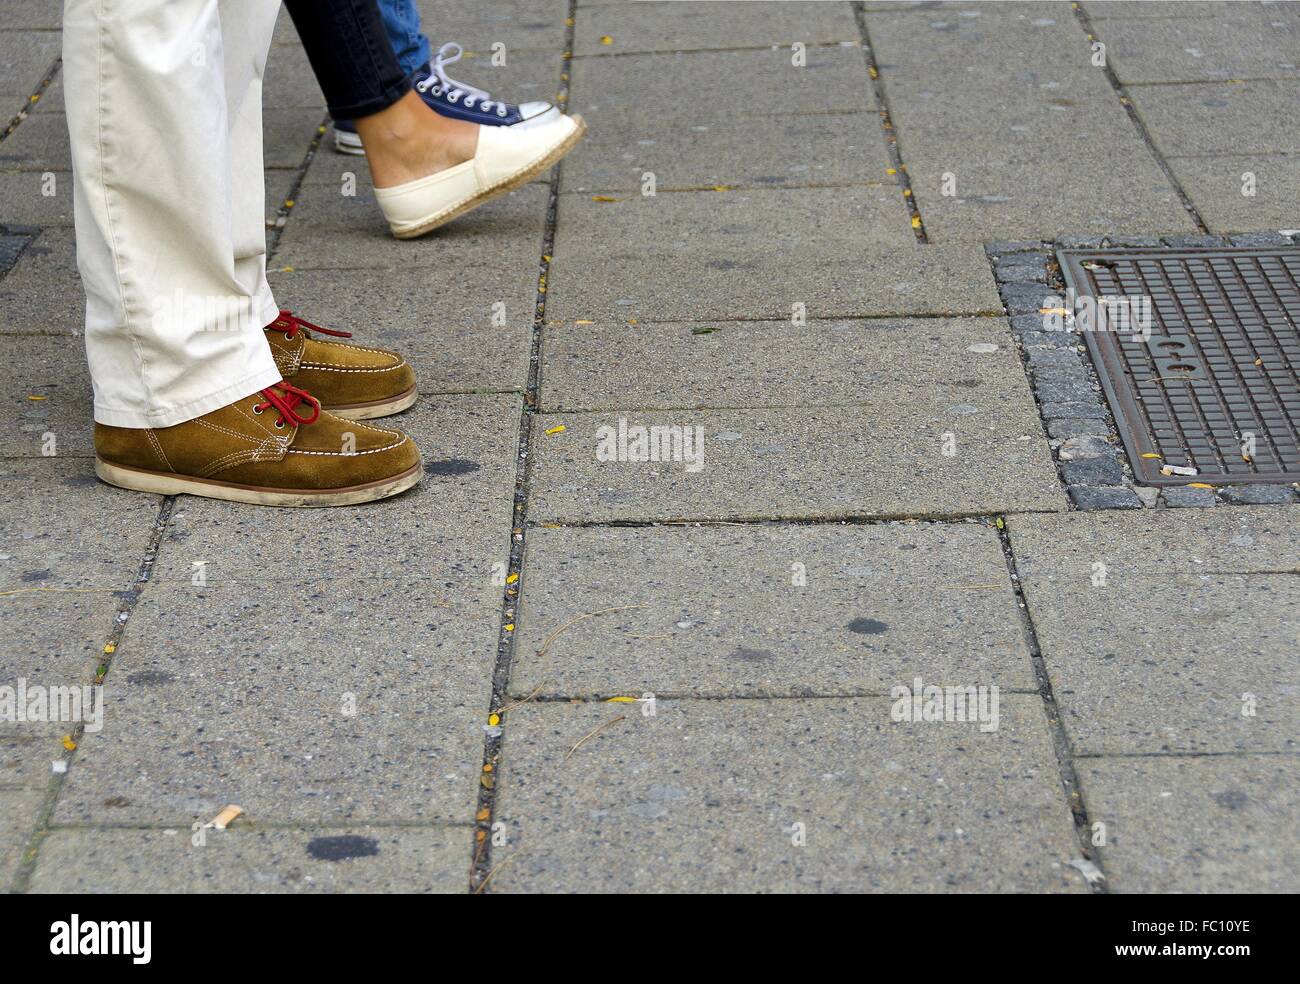 feet of shoppers on a paved sidewalk Stock Photo